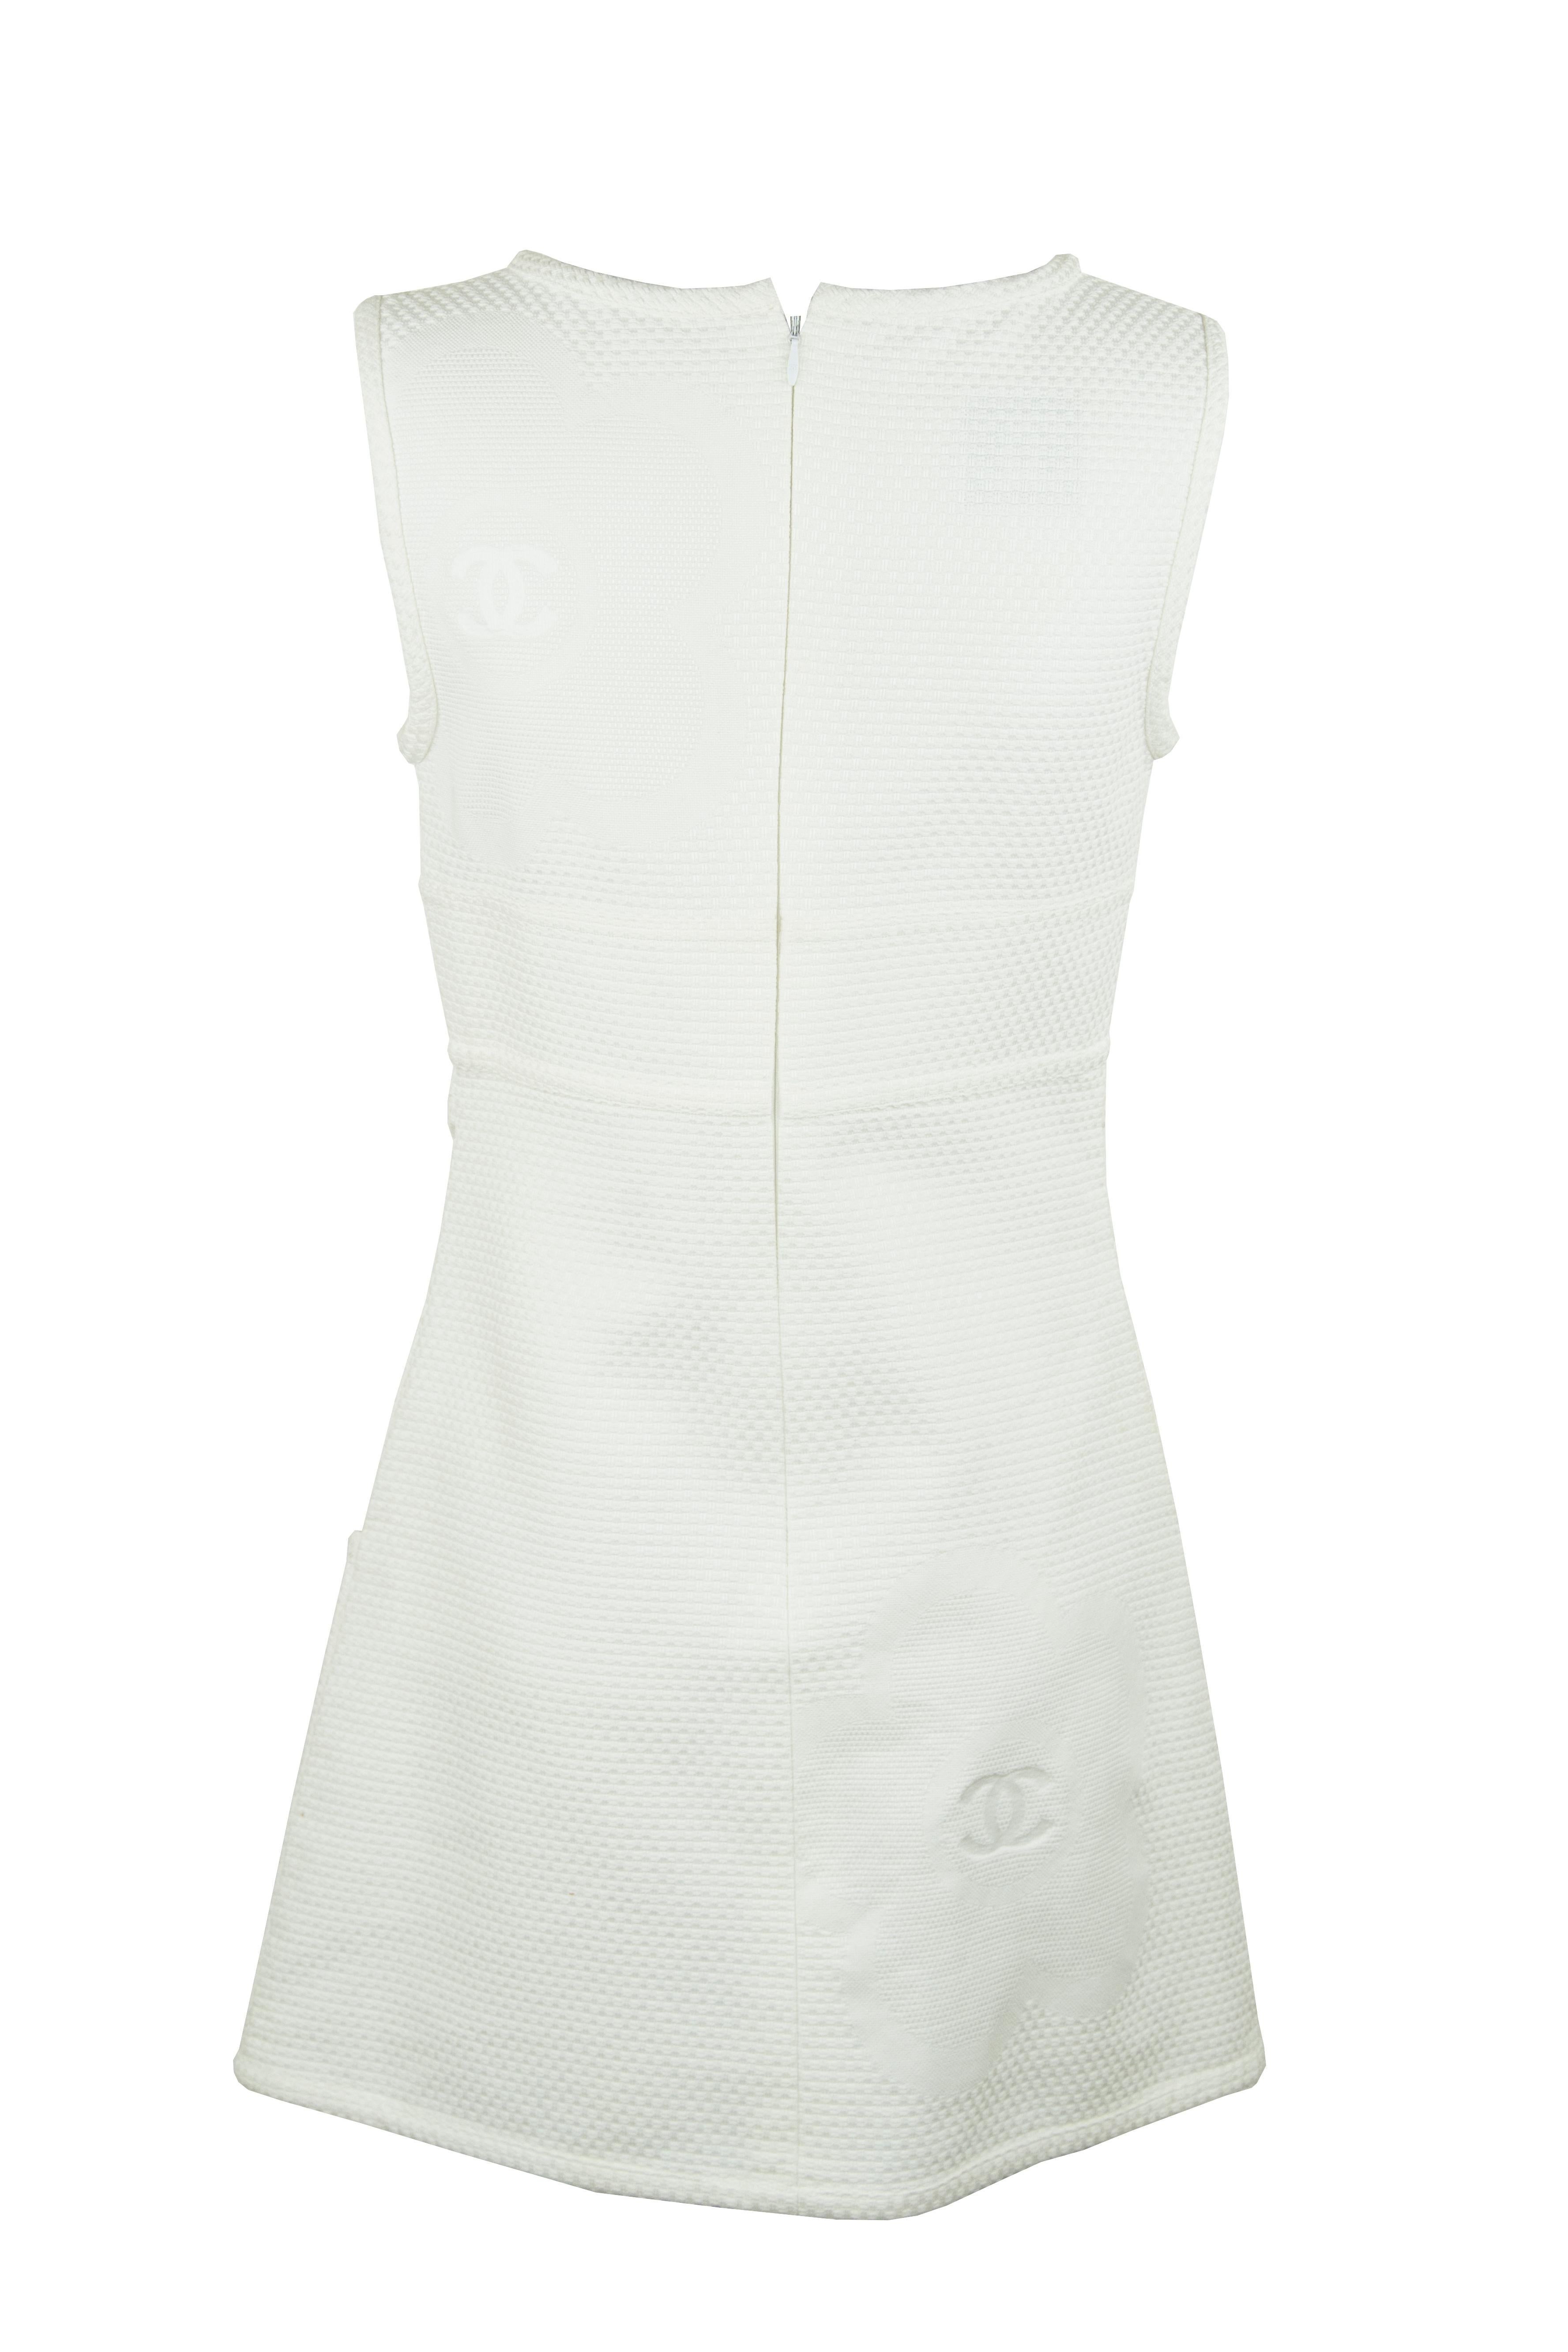 Adorable pique a-line dress to throw on for summer.  A gorgeous white cotton pique with Chanel logos woven into the fabric.

Size: FR 38

Condition: In excellent condition

Made in France